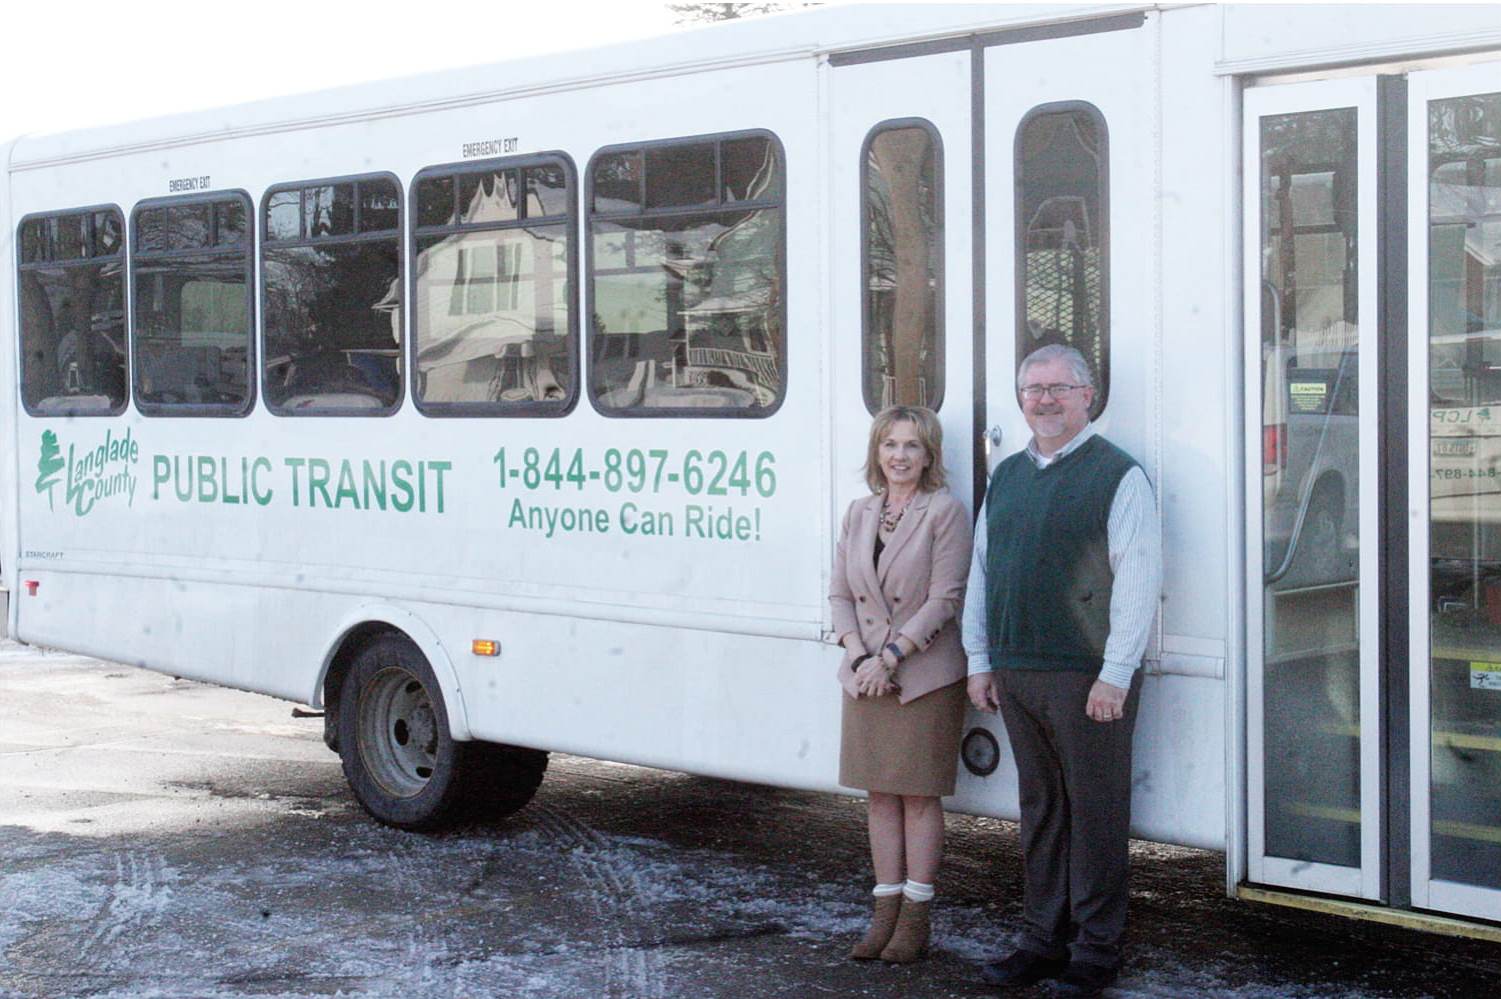 Pam Resch, Langlade County Finance Director, and Danny Pyeatt, Antigo supervisor for Red Robin/Menominee
Department of Transit Services, show off the fresh look for the rebranded county-wide transit system.